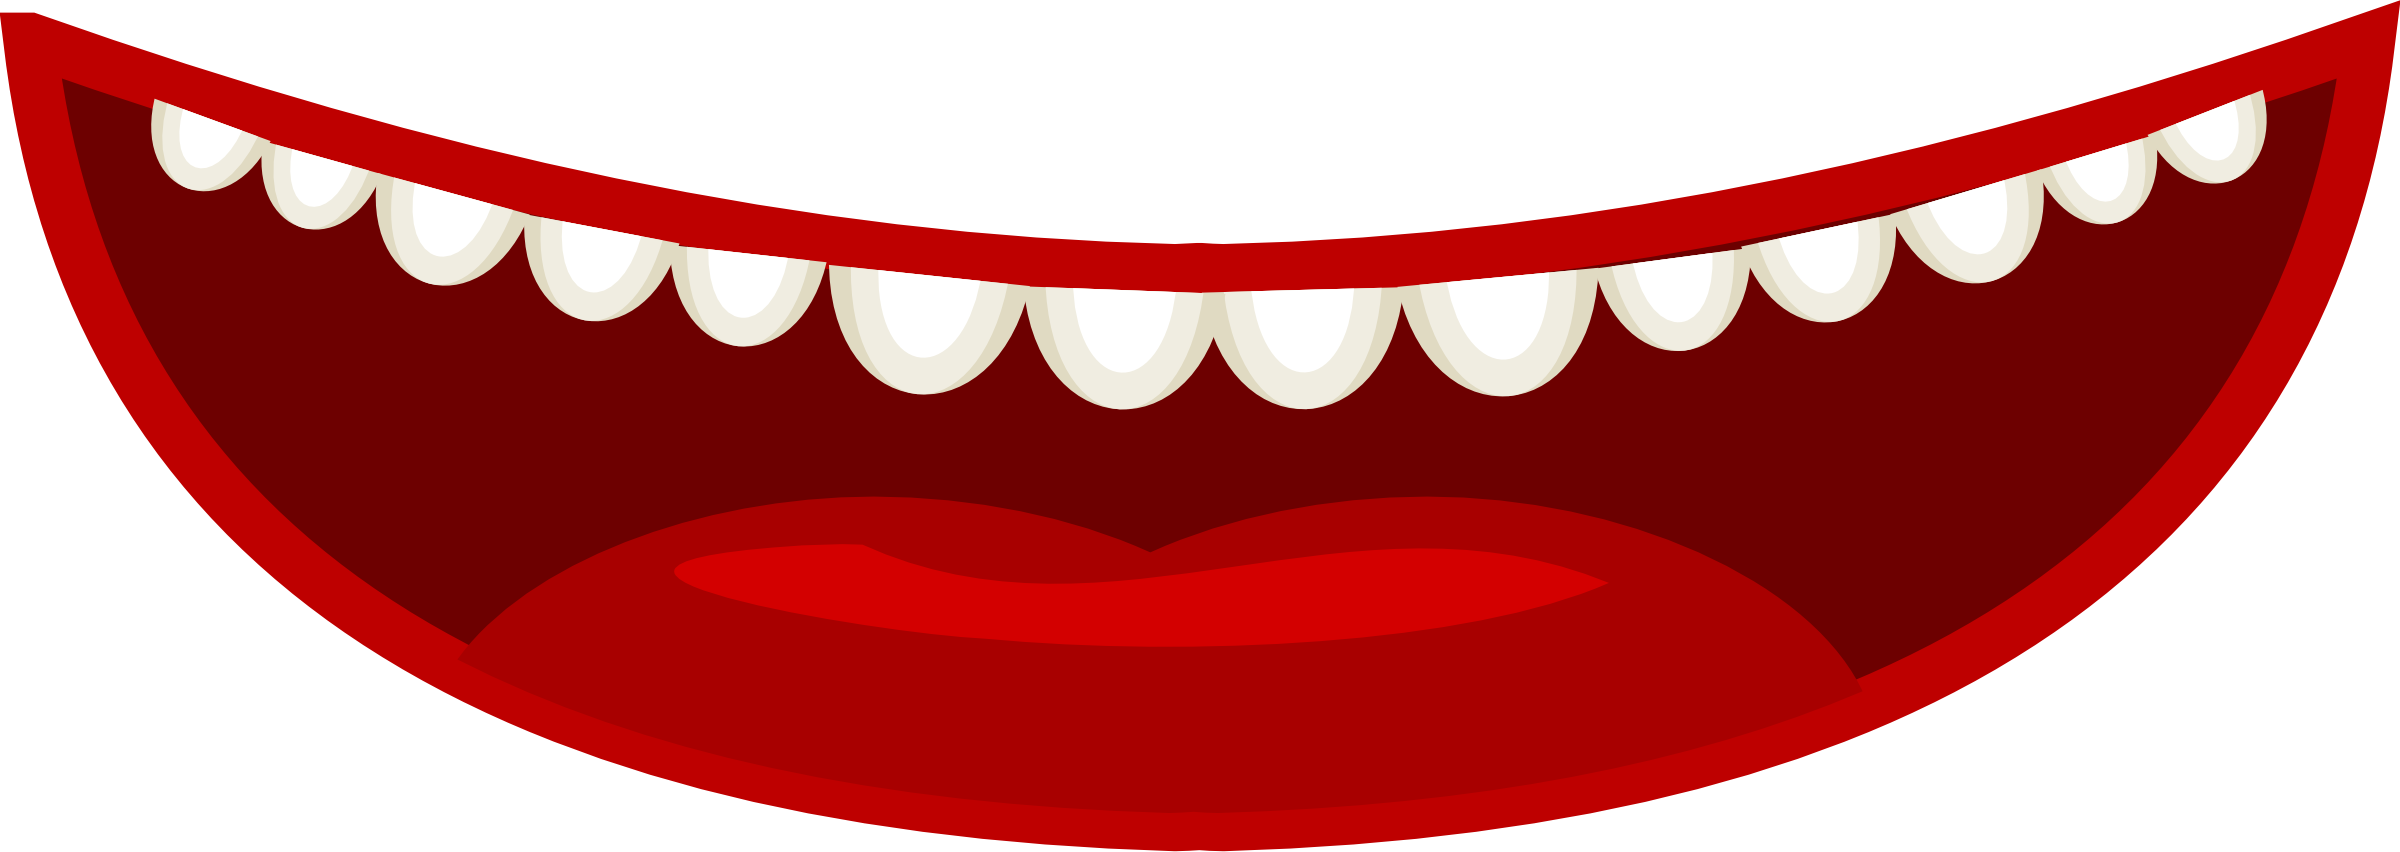 clipart mouth monster